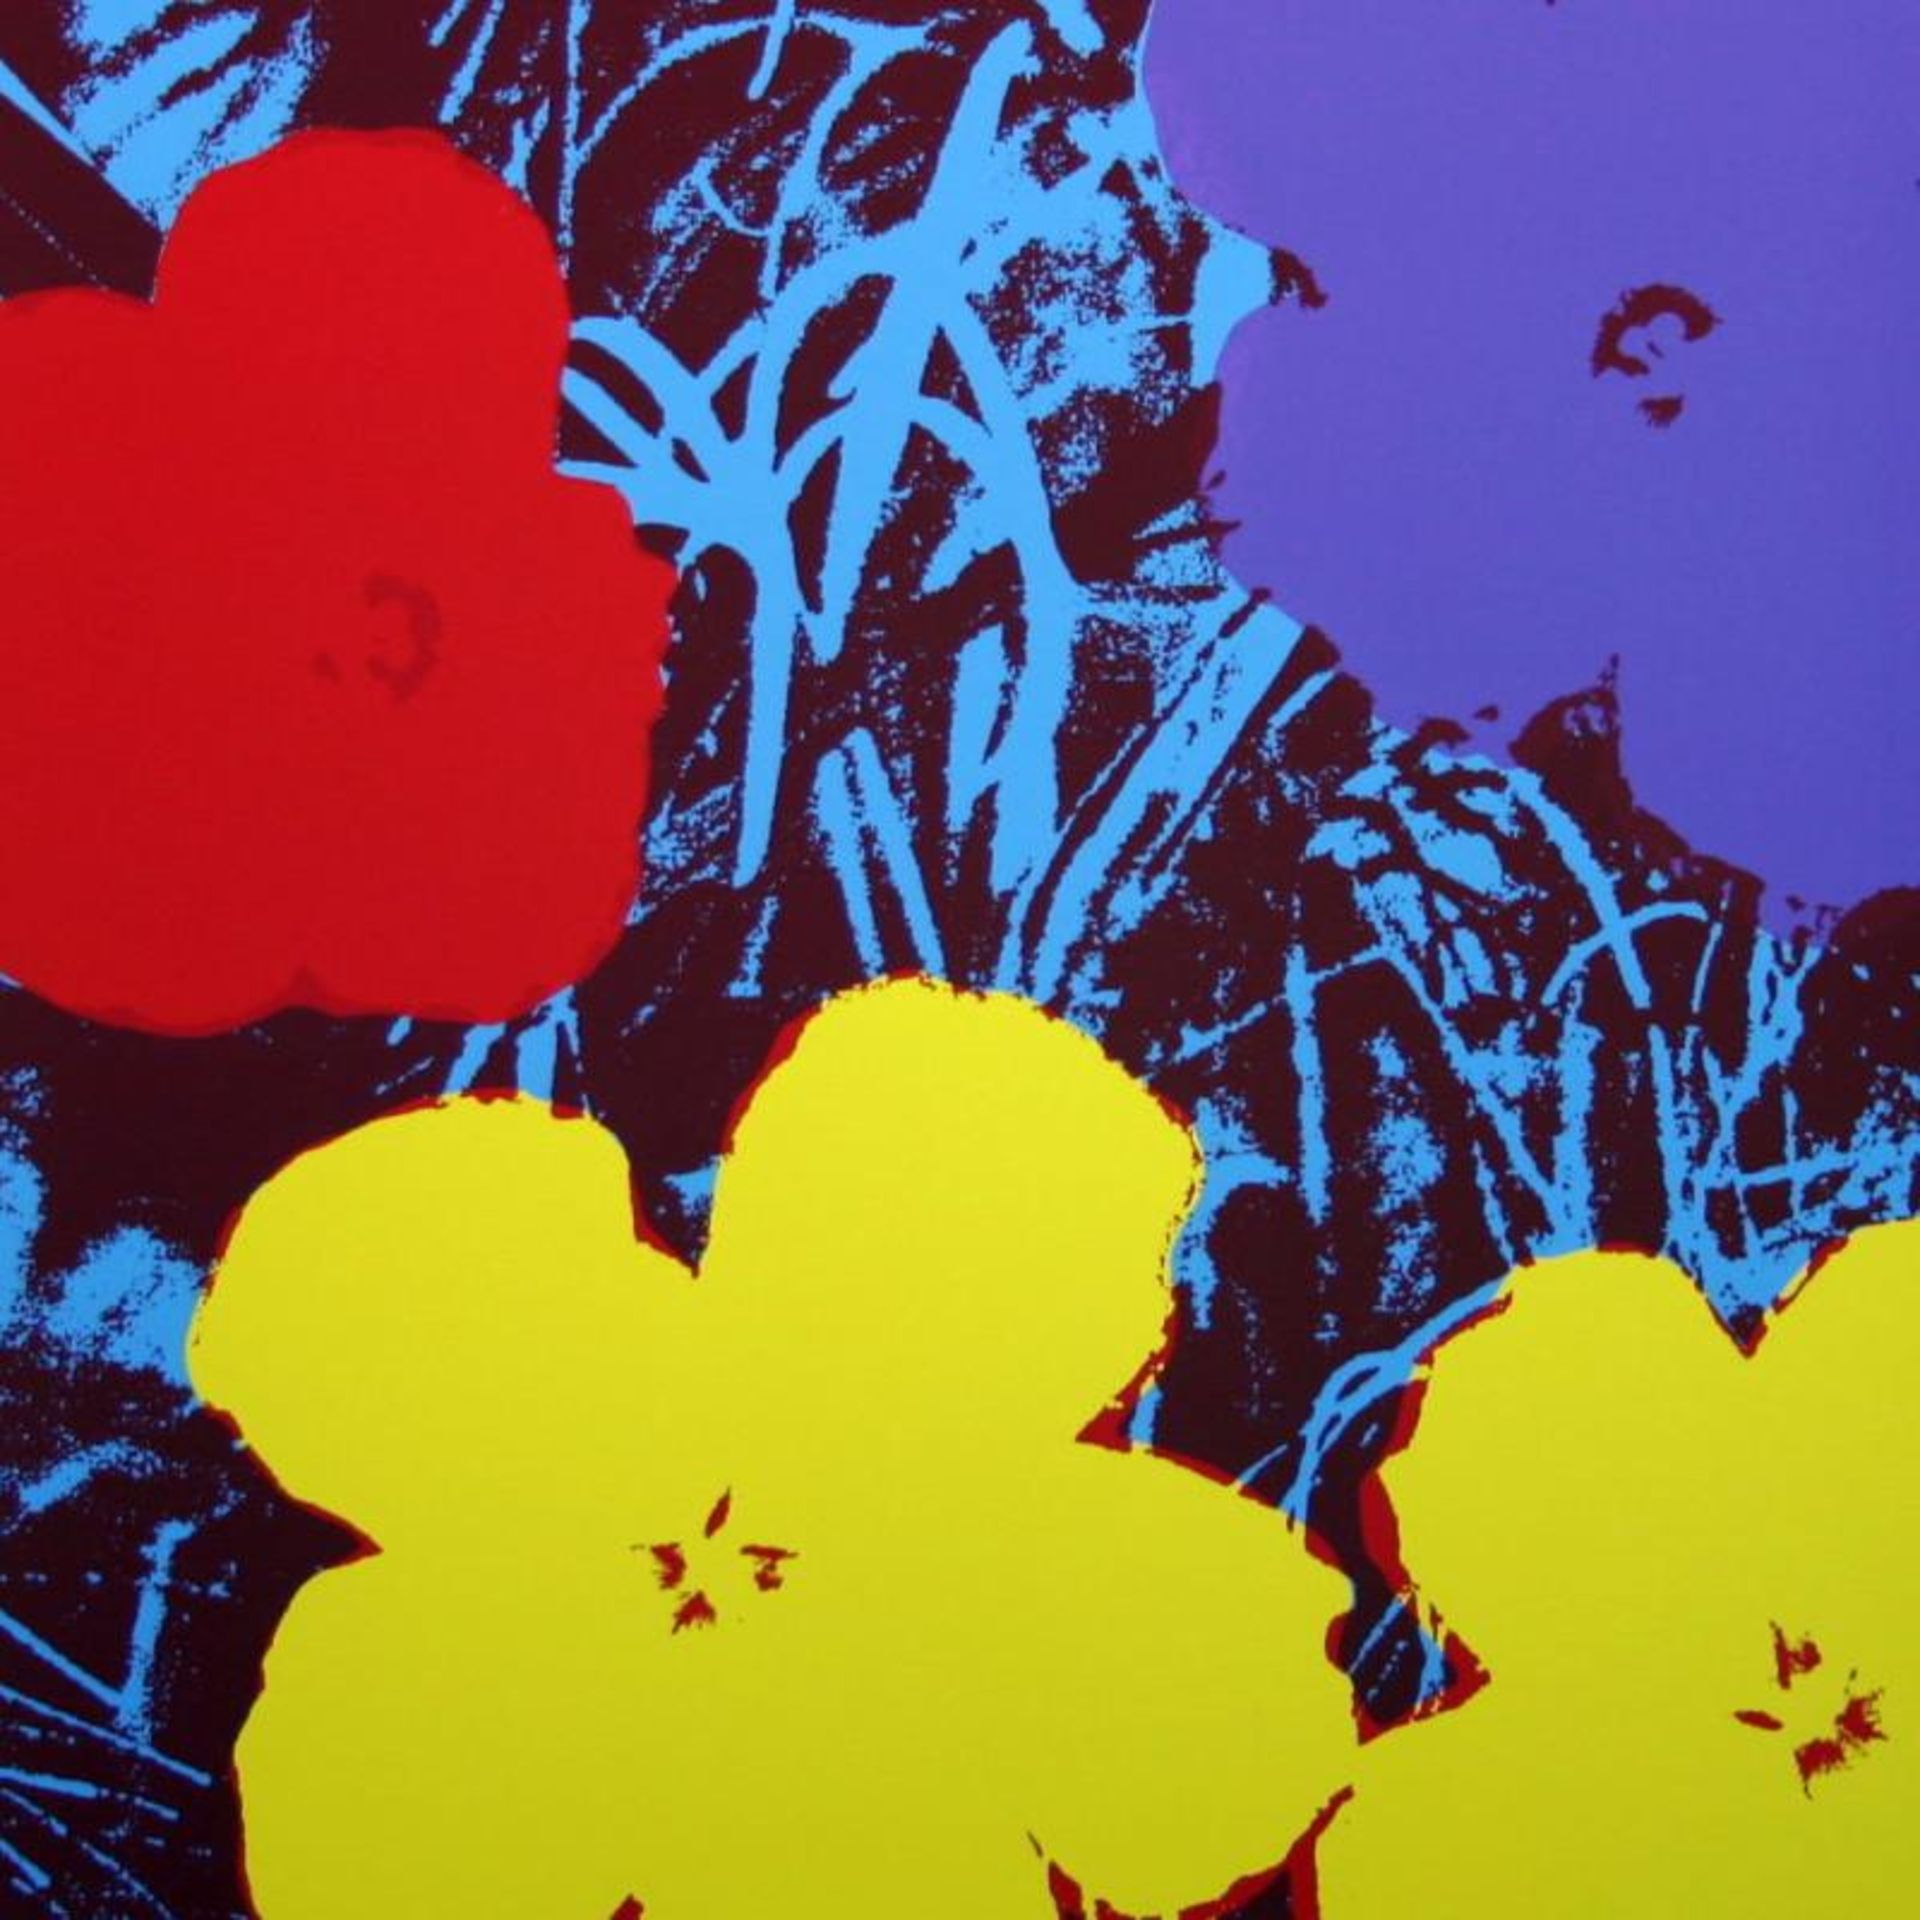 Flowers 11.71 by Warhol, Andy - Image 2 of 2